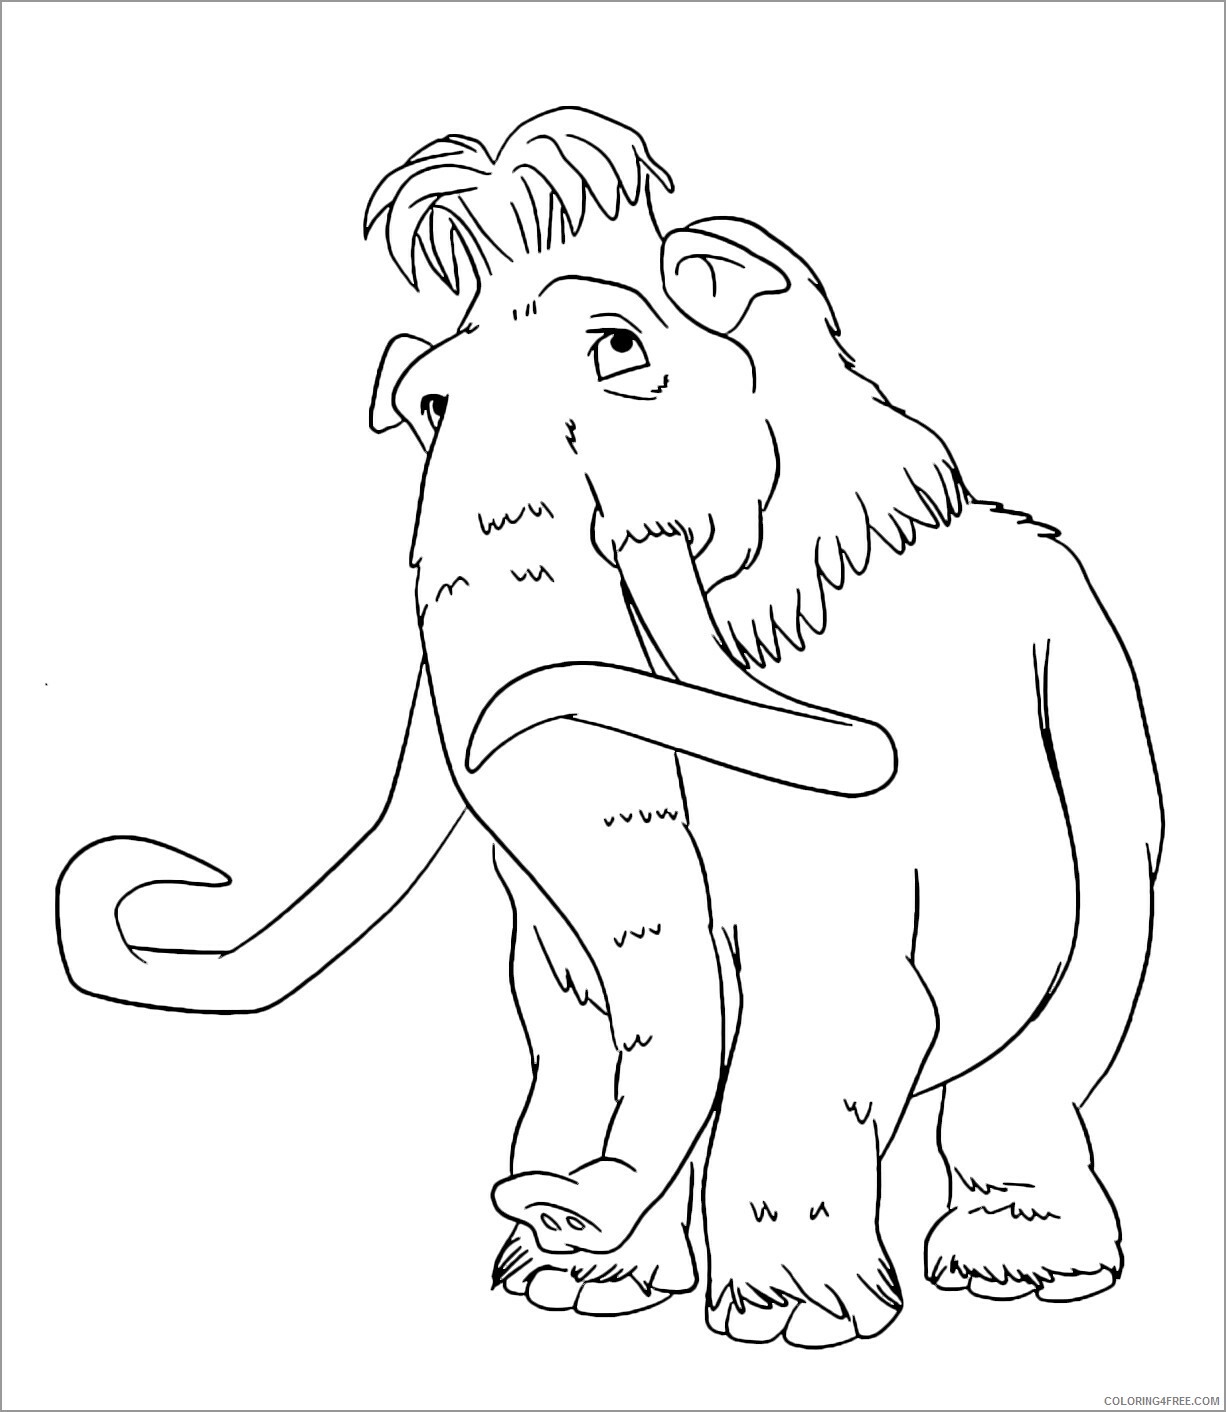 Download Mammoth Coloring Pages Animal Printable Sheets cartoon mammoth 2021 3266 Coloring4free ...